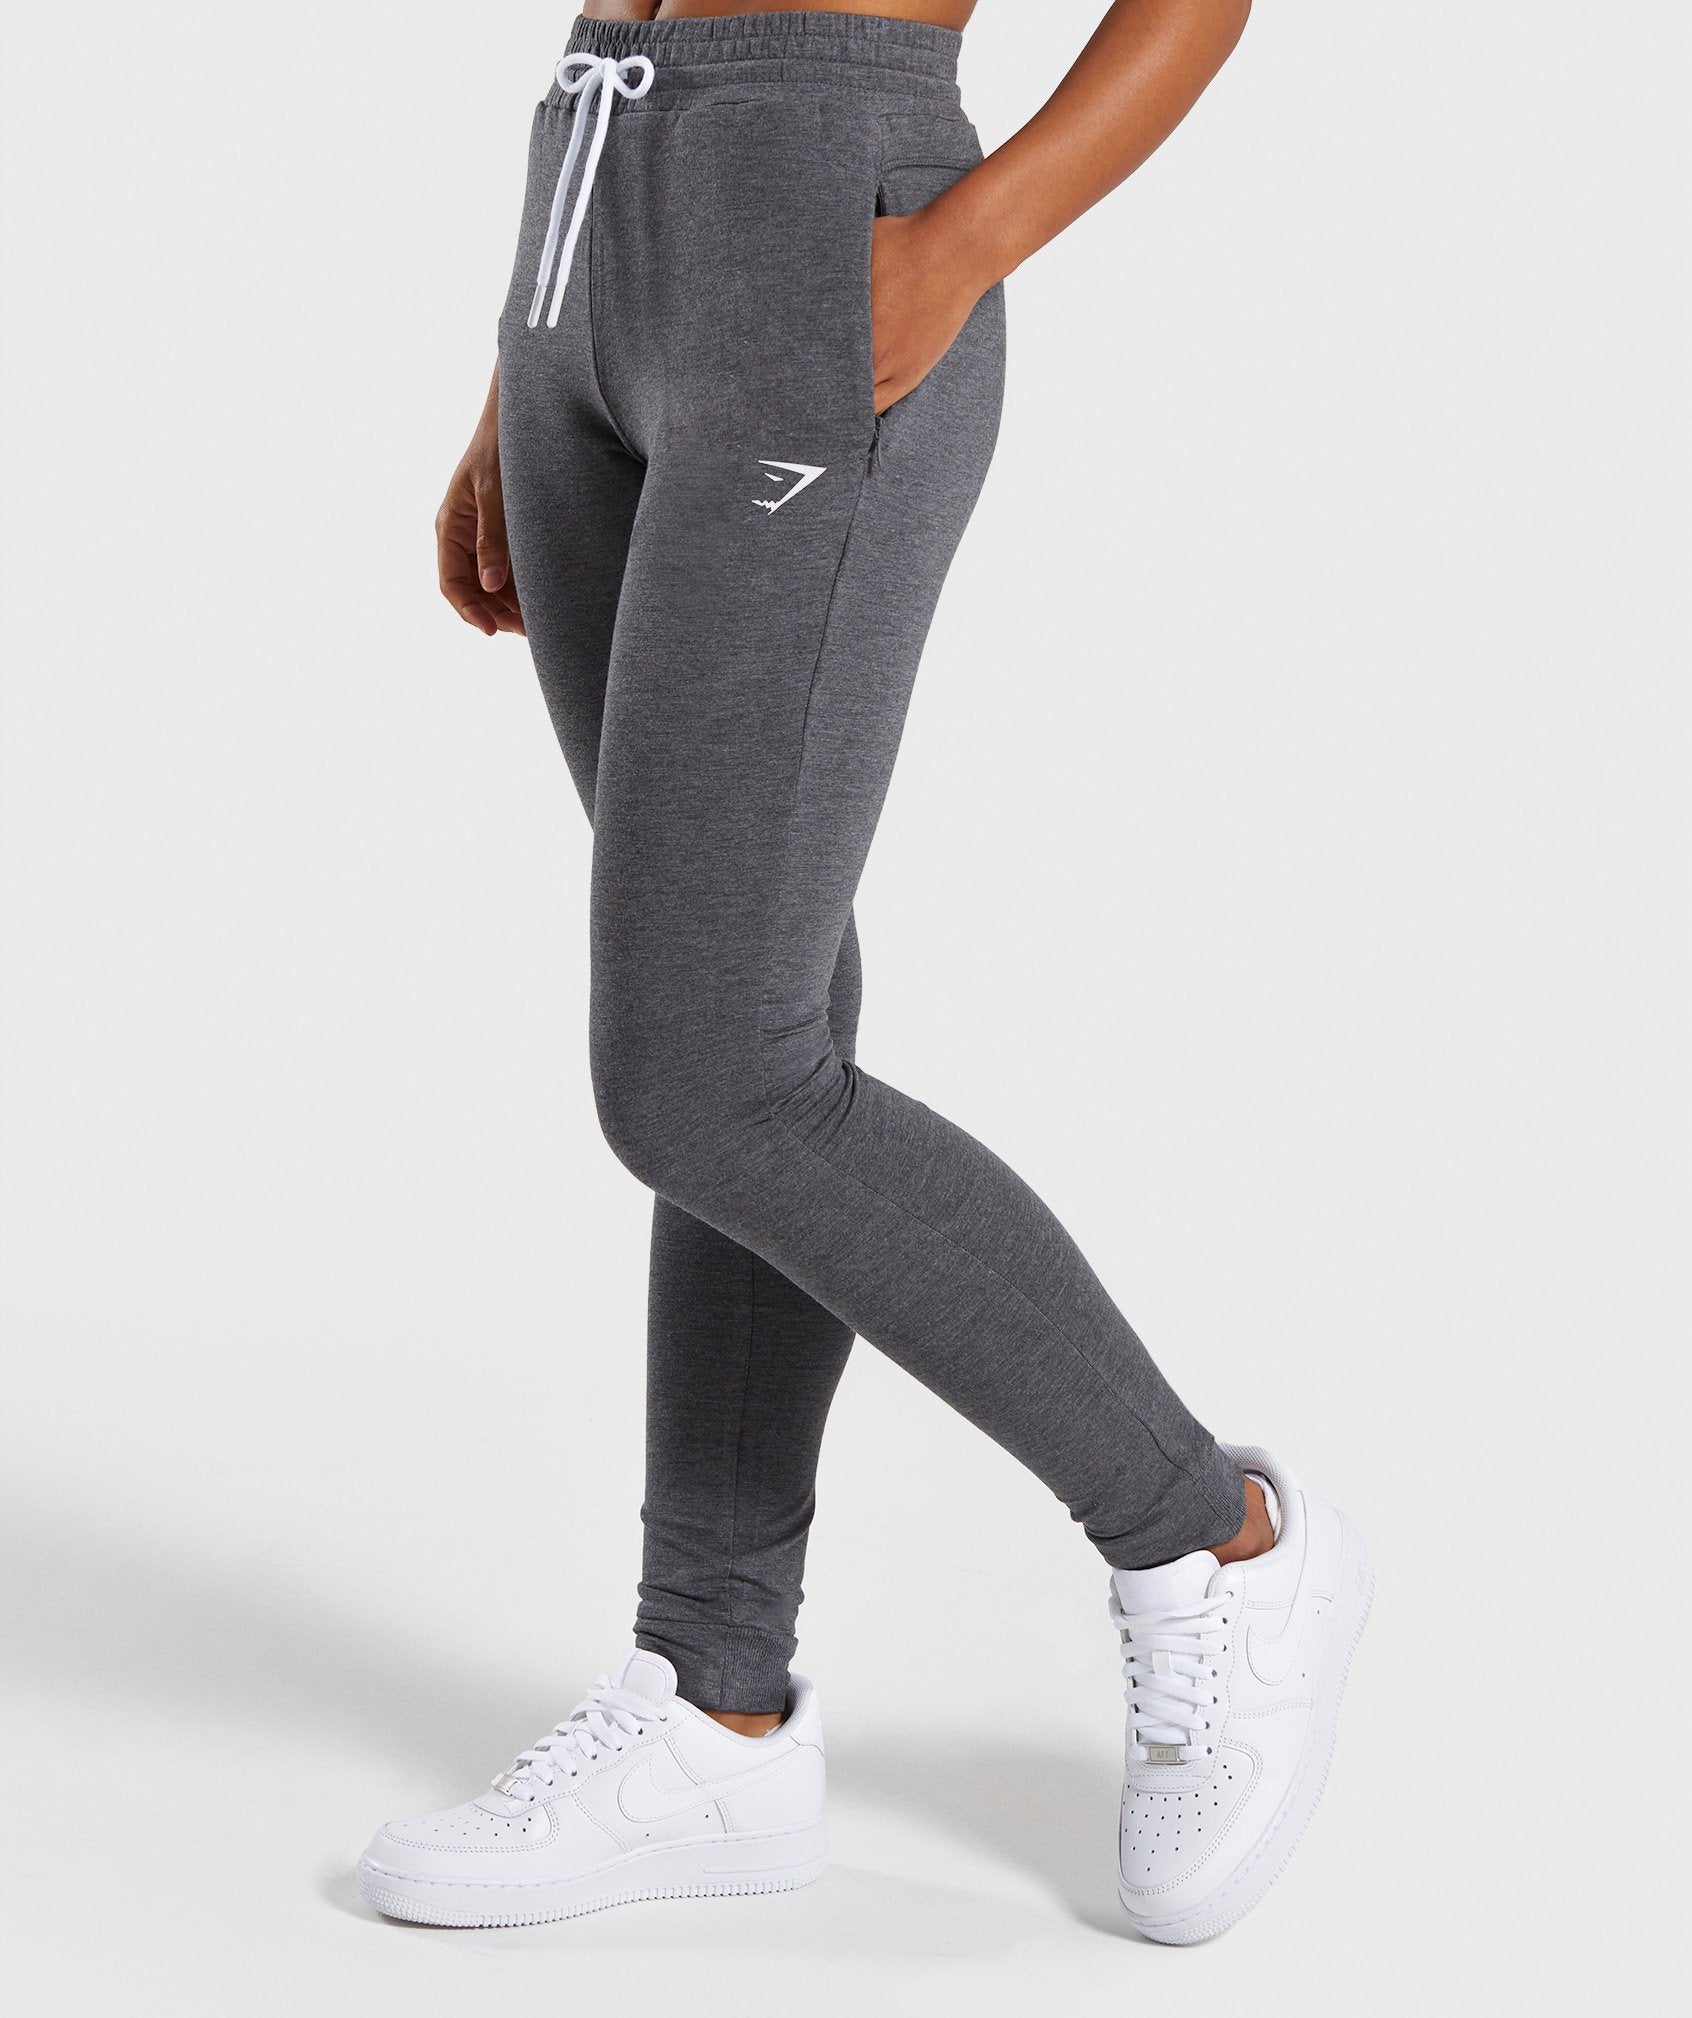 Solace Bottoms in Charcoal Marl - view 3